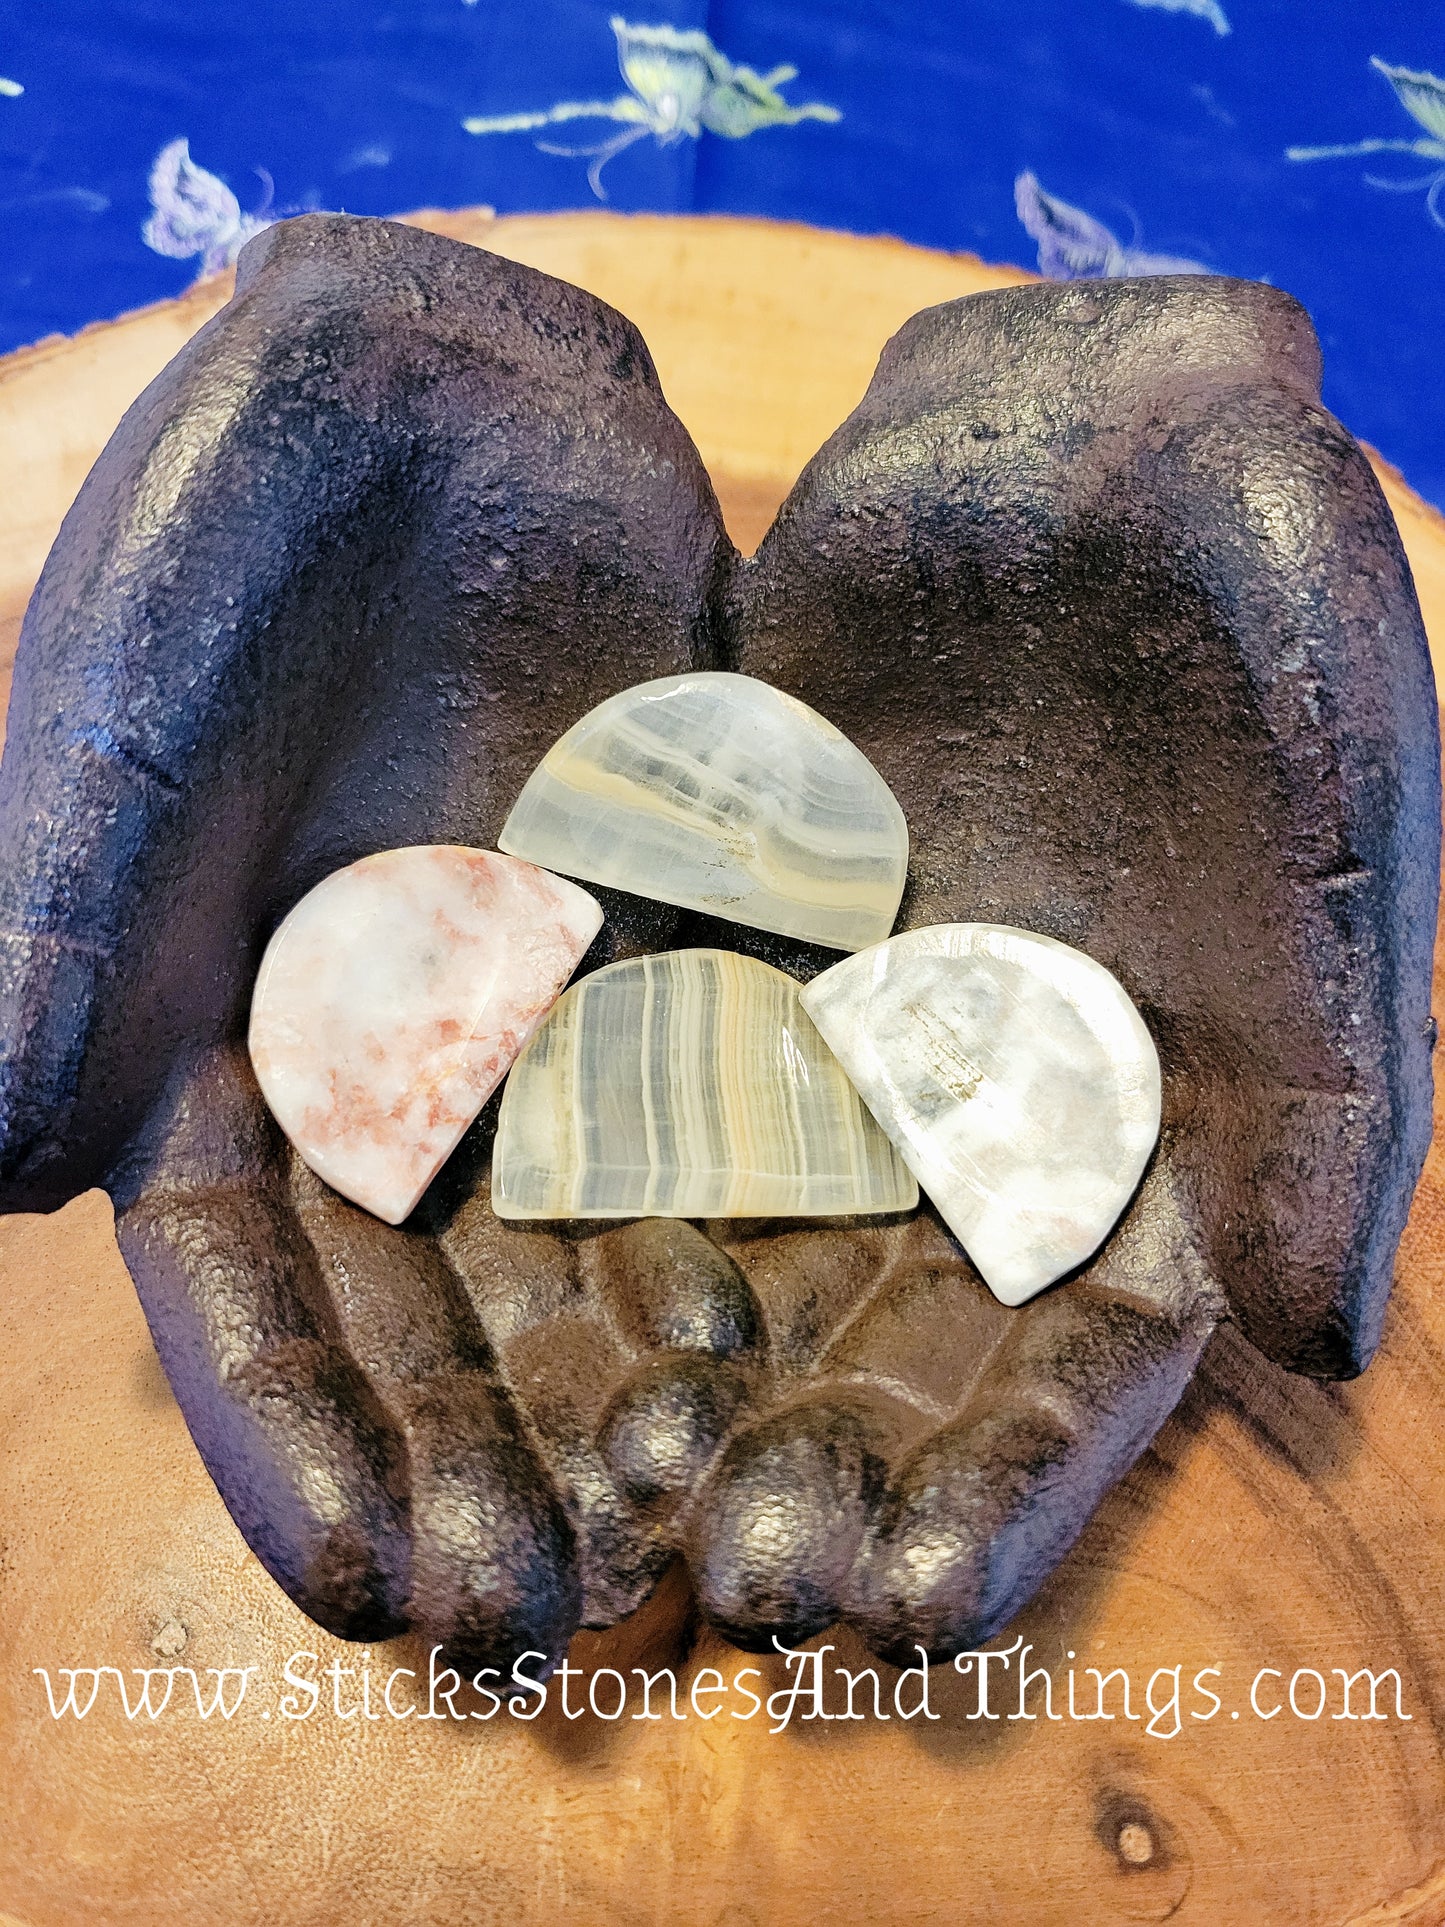 Mexican Onyx Half Moon Worry Stones 1.75 inches